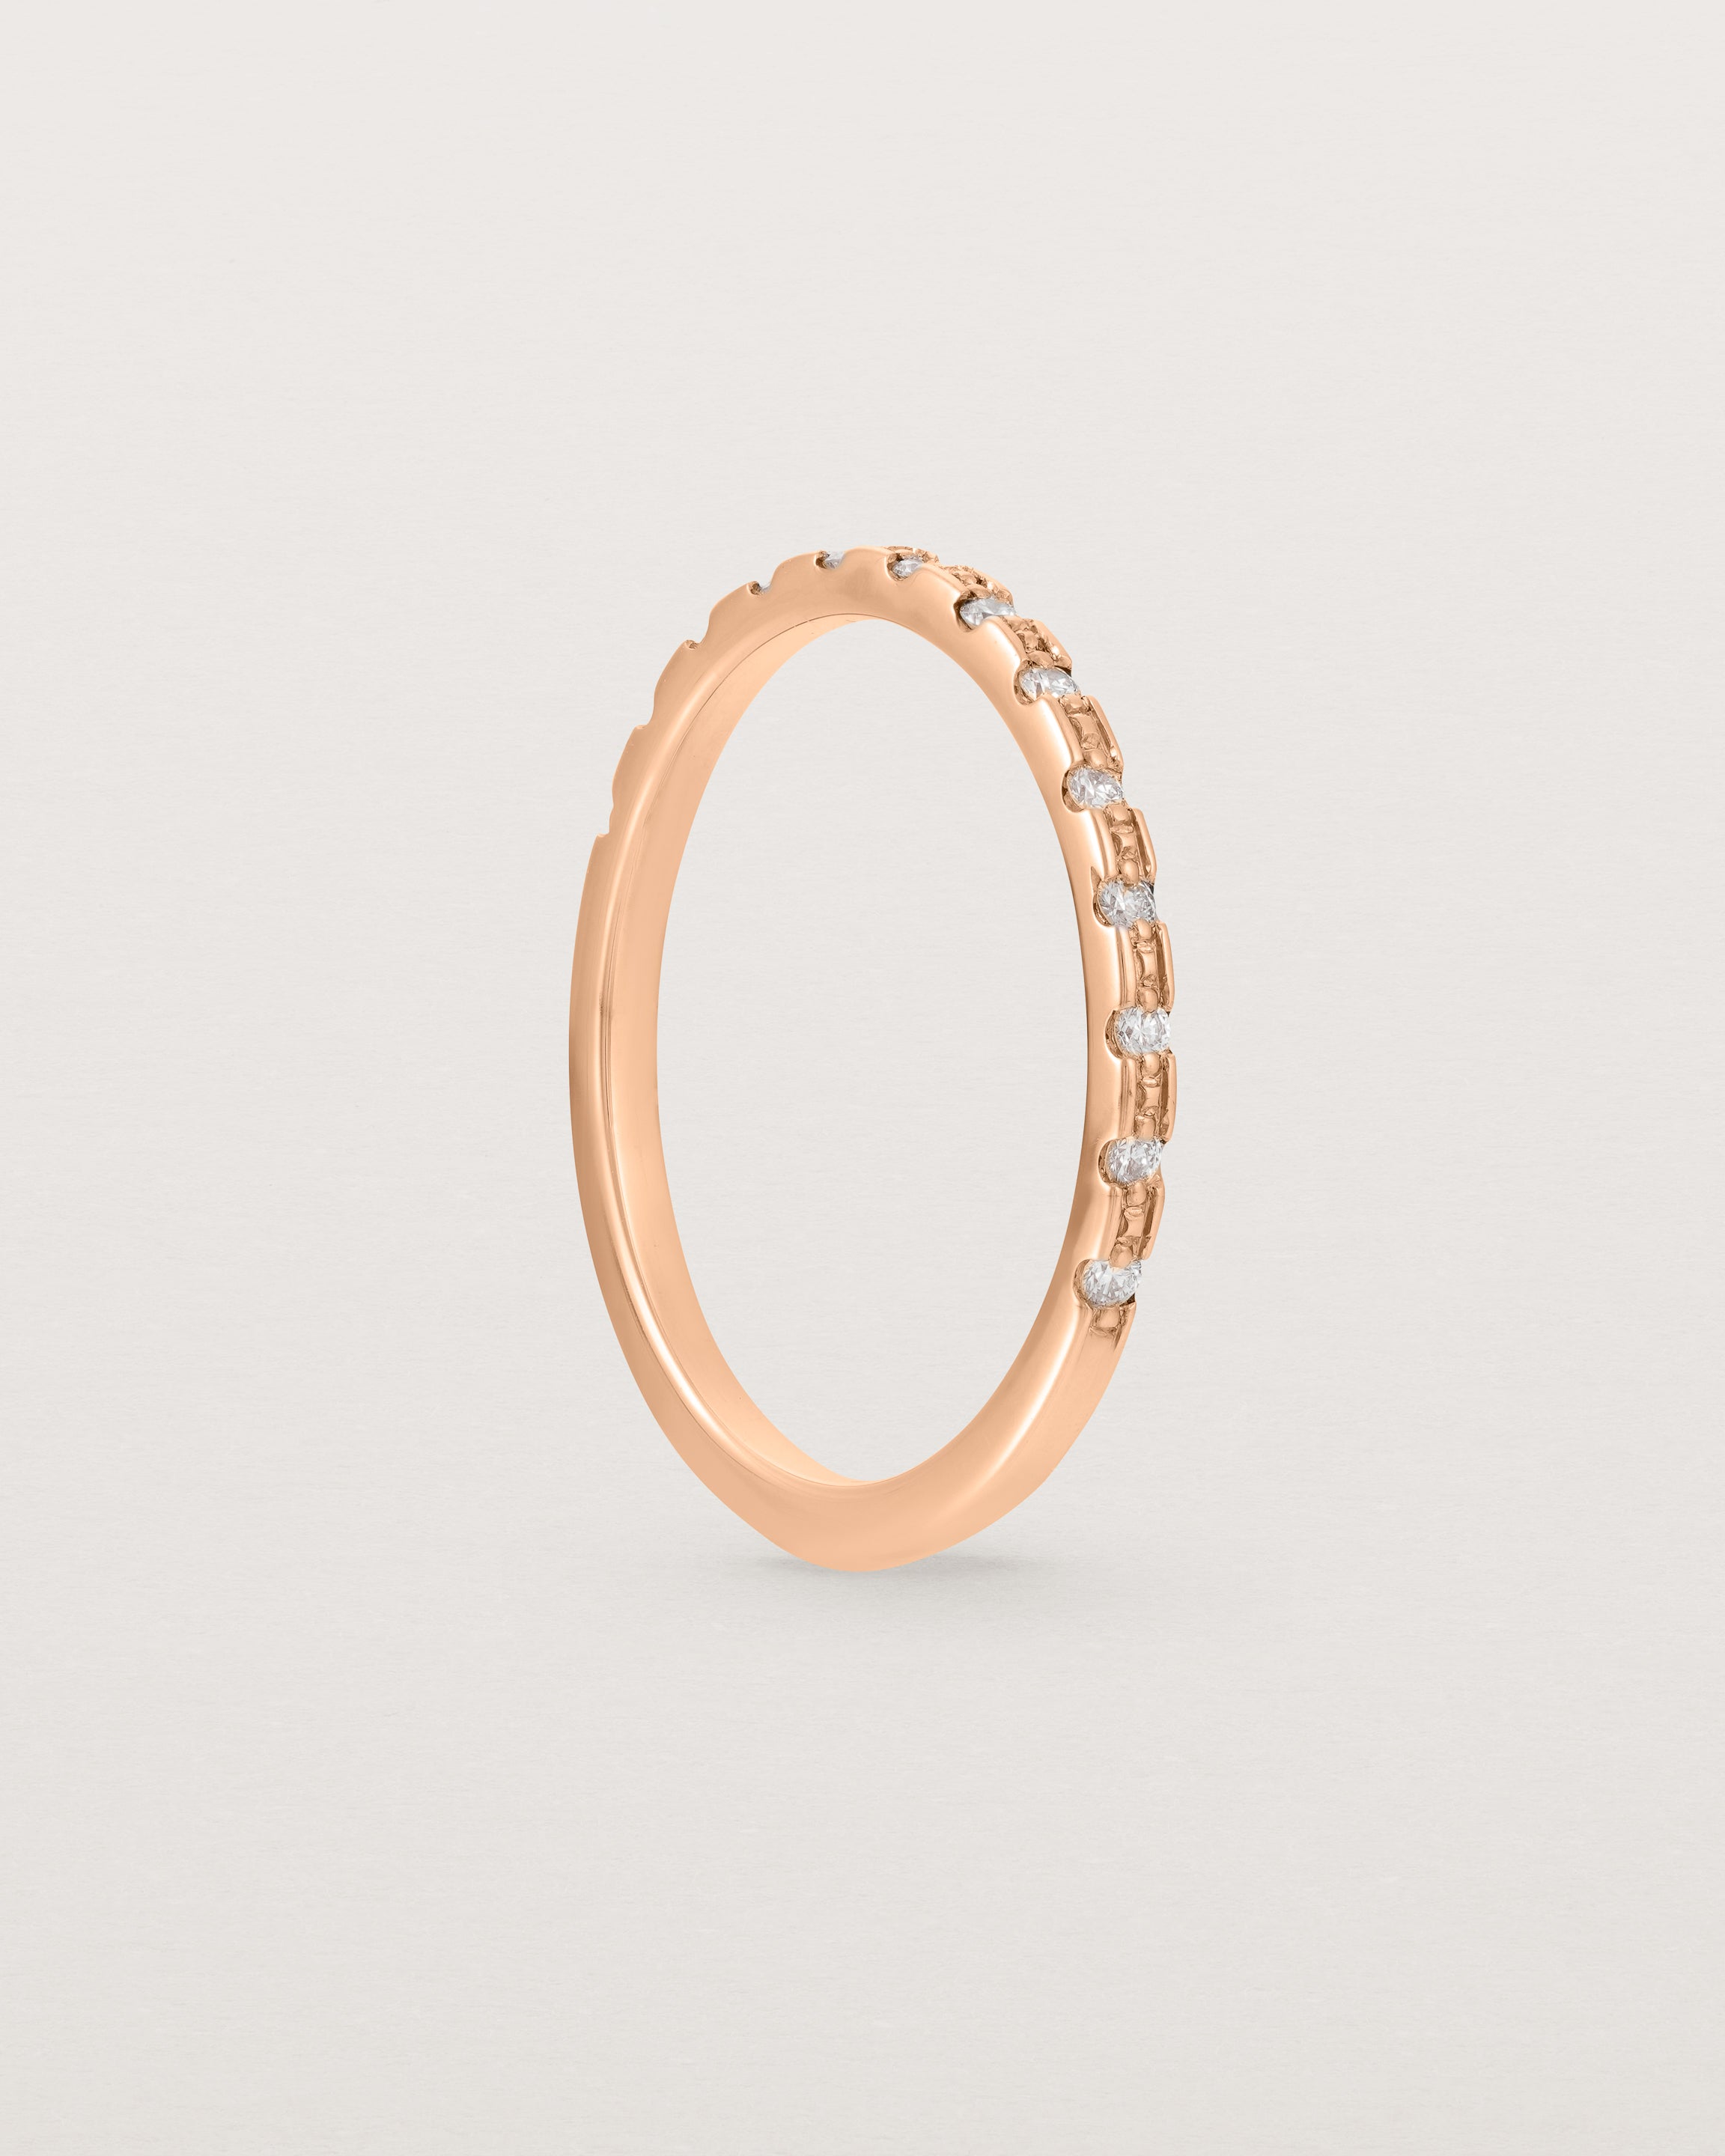 Standing View of Cascade Square Profile Wedding Ring | Diamonds | Rose Gold